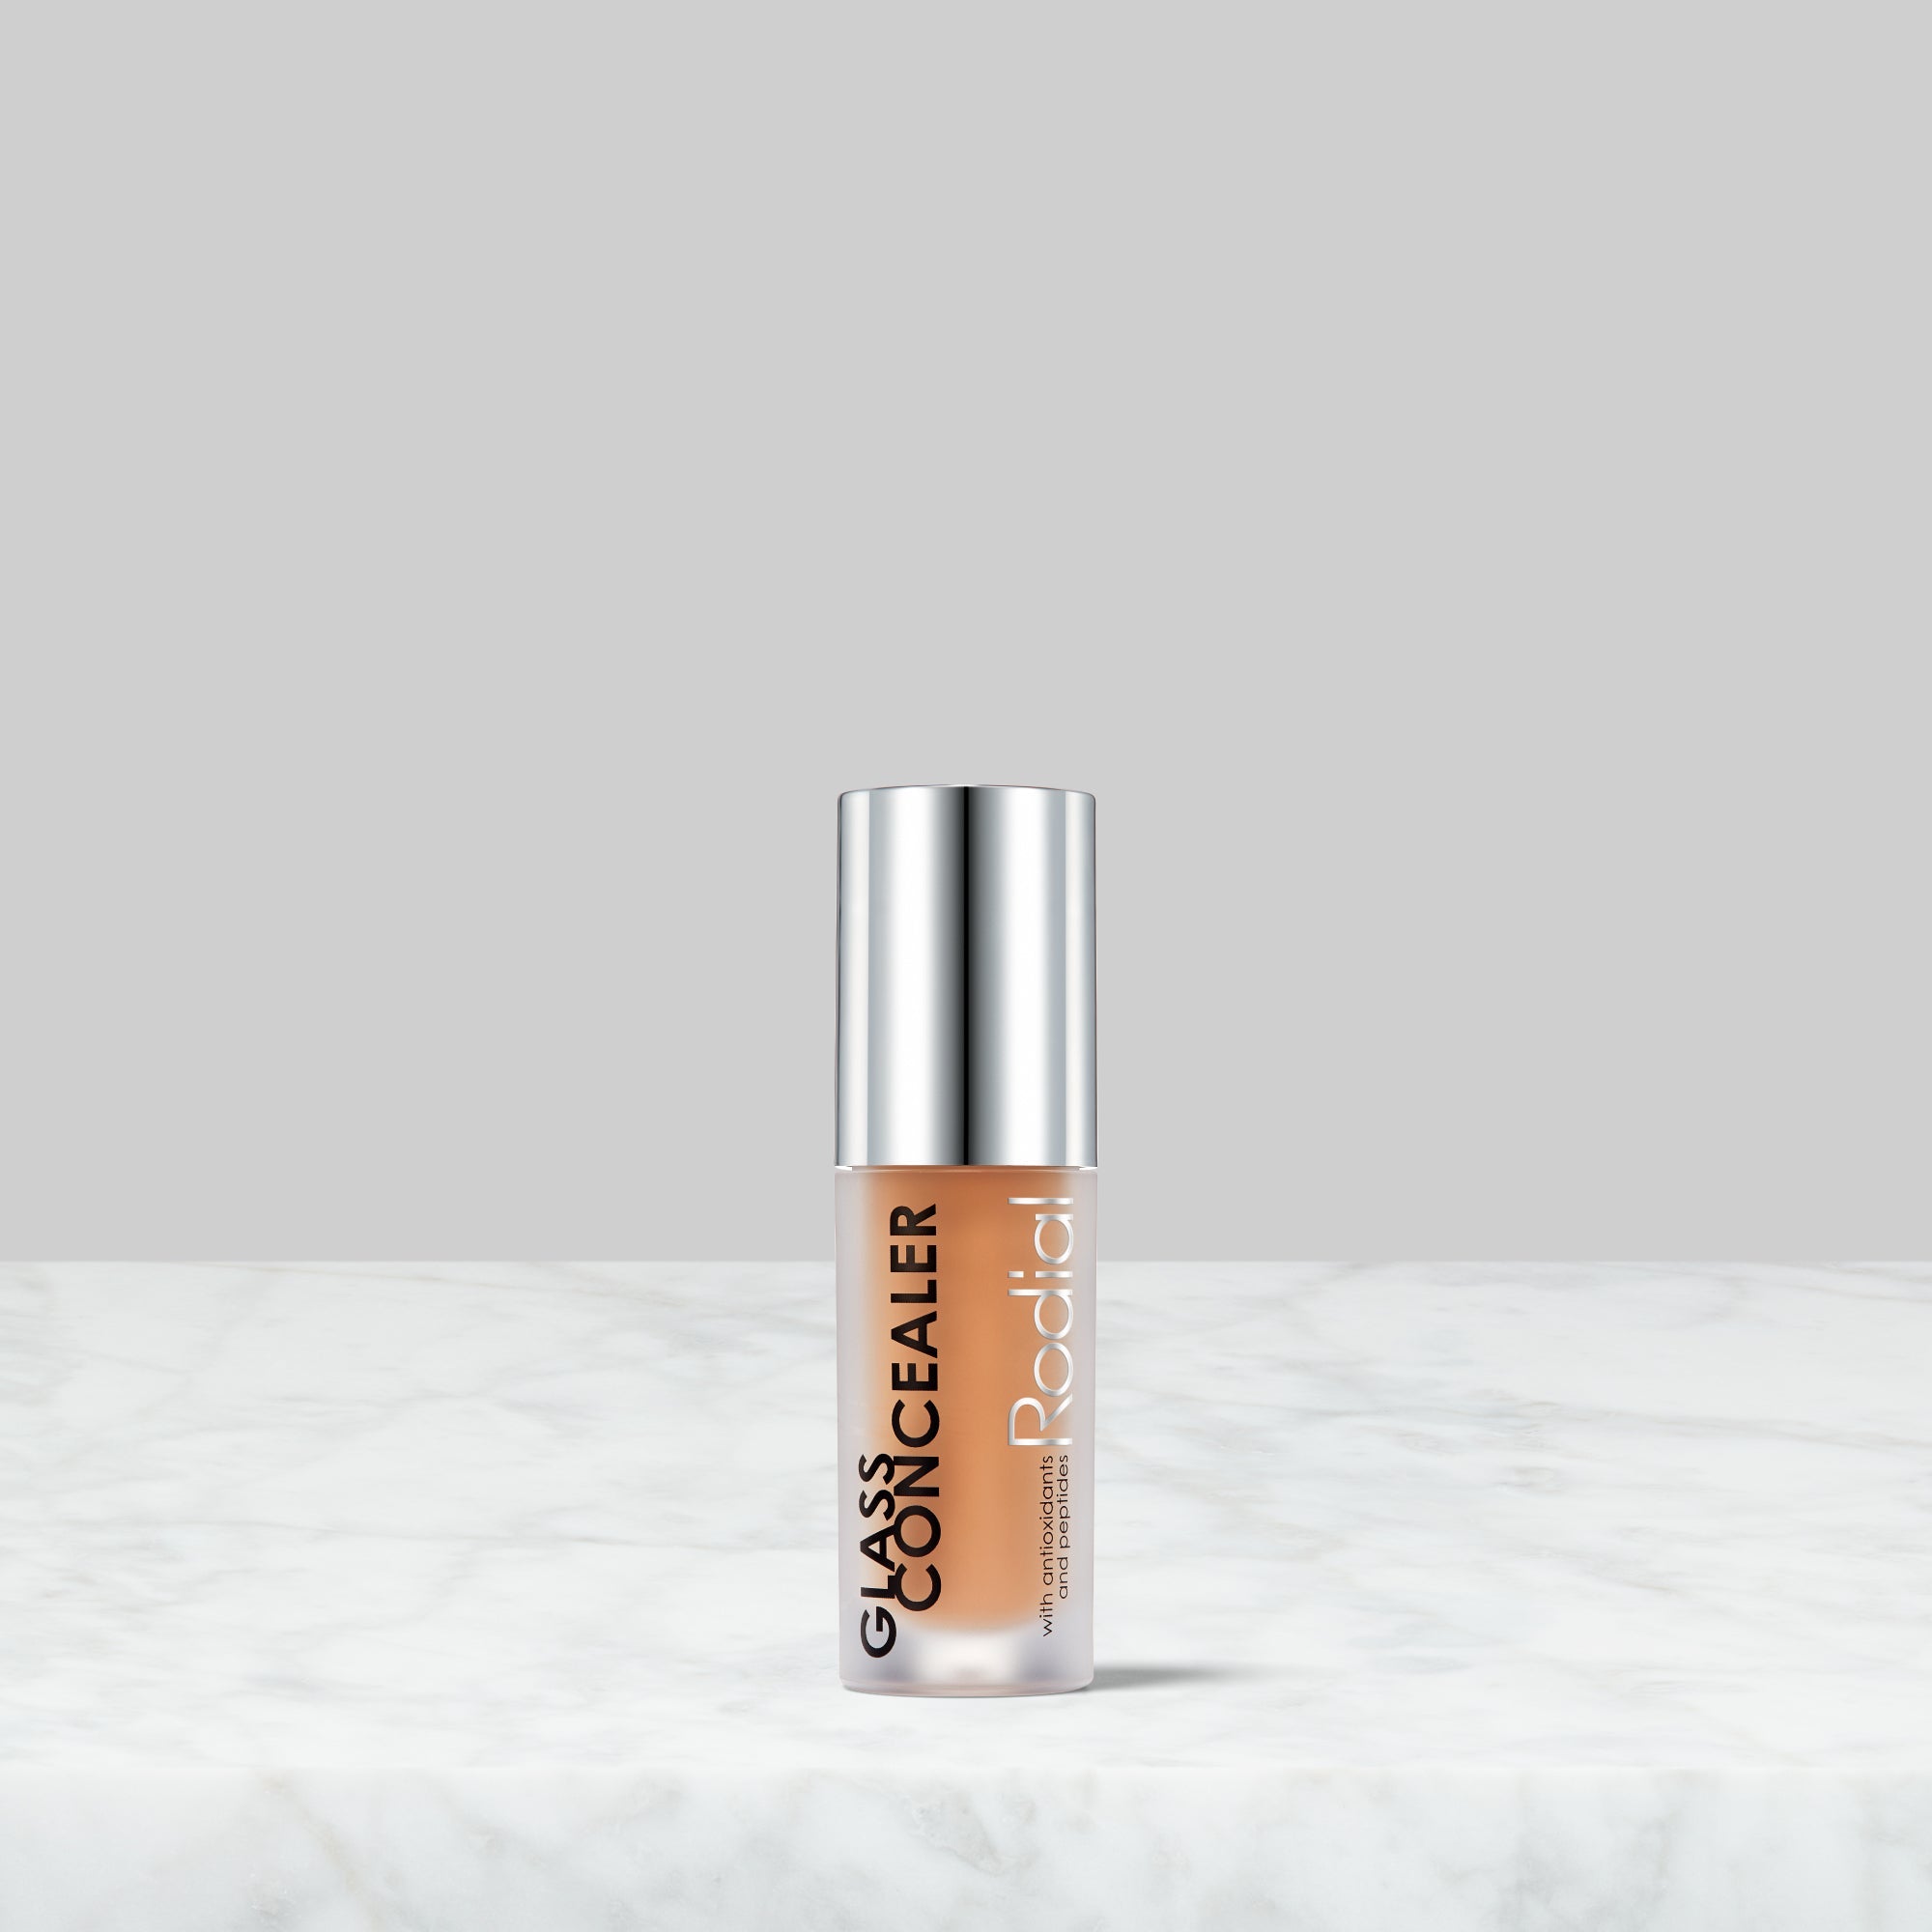 Rodial Glass Concealer / Shade 02